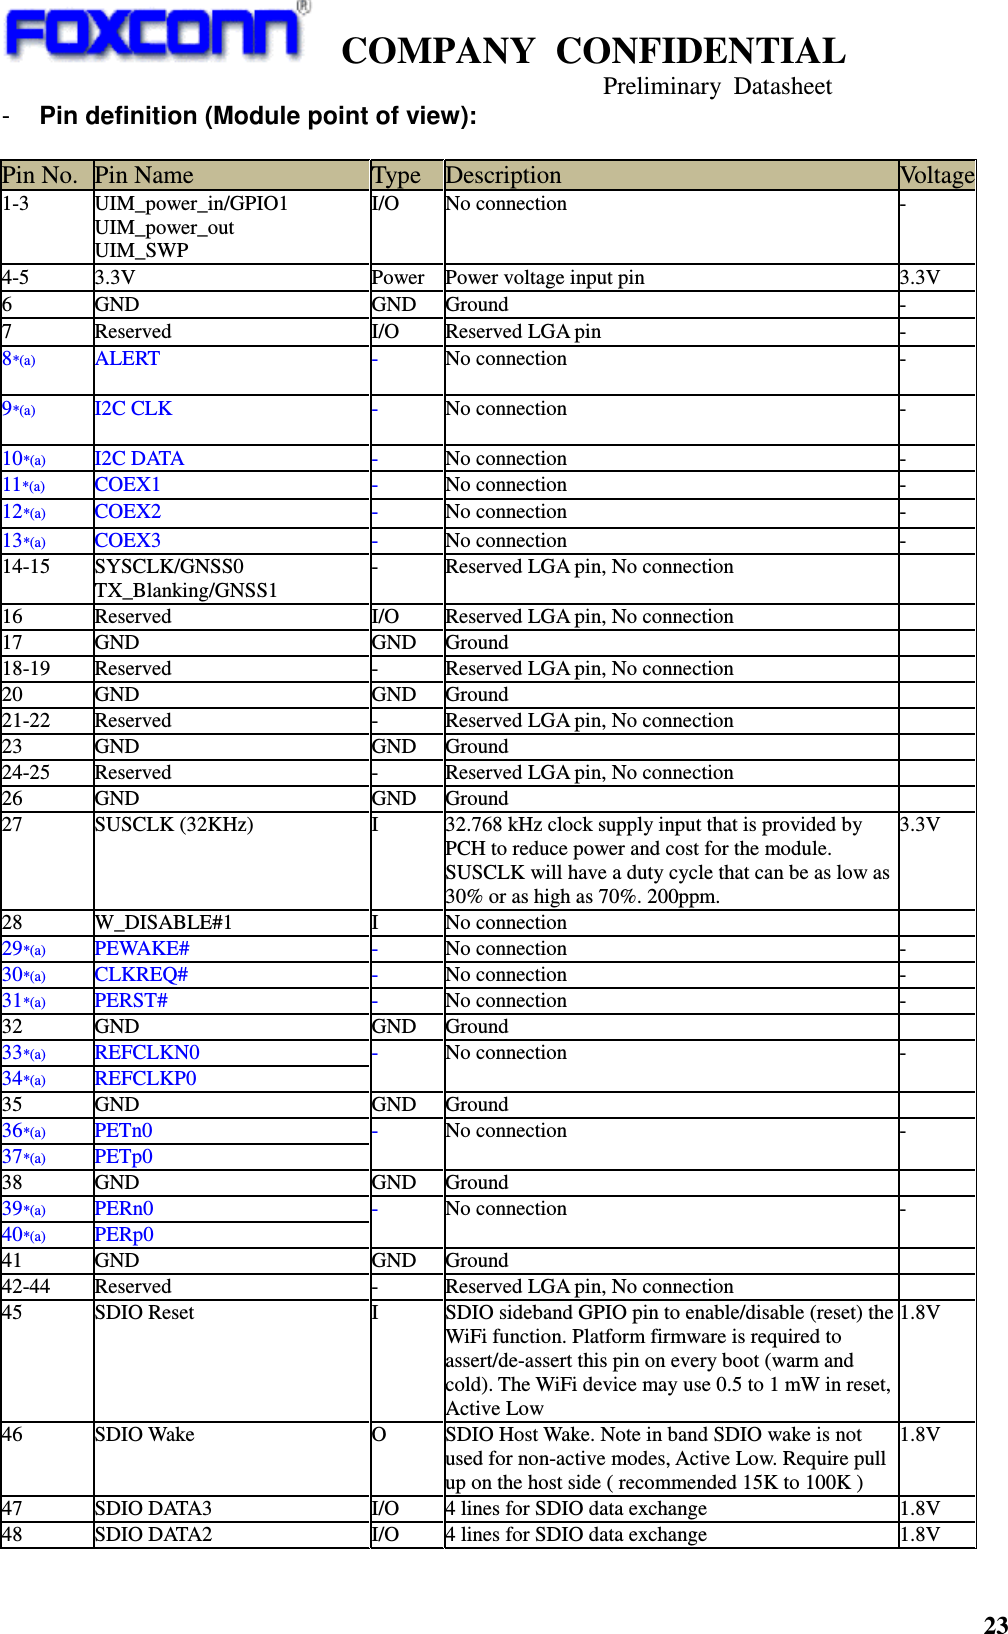    COMPANY  CONFIDENTIAL                                                                     Preliminary  Datasheet 23  -  Pin definition (Module point of view):  Pin No. Pin Name  Type  Description  Voltage 1-3  UIM_power_in/GPIO1 UIM_power_out UIM_SWP I/O  No connection  - 4-5  3.3V  Power  Power voltage input pin  3.3V 6  GND  GND  Ground  - 7  Reserved  I/O  Reserved LGA pin  - 8*(a)  ALERT  -  No connection -  9*(a)  I2C CLK  -  No connection -  10*(a)  I2C DATA  -  No connection - 11*(a)  COEX1  -  No connection - 12*(a)  COEX2  -  No connection - 13*(a)  COEX3  -  No connection - 14-15  SYSCLK/GNSS0 TX_Blanking/GNSS1 -  Reserved LGA pin, No connection    16  Reserved  I/O  Reserved LGA pin, No connection   17  GND  GND  Ground   18-19  Reserved  -  Reserved LGA pin, No connection   20  GND  GND  Ground   21-22  Reserved  -  Reserved LGA pin, No connection   23  GND  GND  Ground   24-25  Reserved  -  Reserved LGA pin, No connection   26  GND  GND  Ground   27  SUSCLK (32KHz)  I  32.768 kHz clock supply input that is provided by PCH to reduce power and cost for the module. SUSCLK will have a duty cycle that can be as low as 30% or as high as 70%. 200ppm.   3.3V 28    W_DISABLE#1  I  No connection   29*(a)  PEWAKE#  -  No connection - 30*(a)  CLKREQ#  -  No connection - 31*(a)  PERST#  -  No connection - 32  GND  GND  Ground   33*(a)  REFCLKN0 34*(a)  REFCLKP0 -  No connection - 35  GND  GND  Ground   36*(a)  PETn0 37*(a)  PETp0 -  No connection - 38  GND  GND  Ground   39*(a)  PERn0 40*(a)  PERp0 -  No connection - 41  GND  GND  Ground   42-44  Reserved  -  Reserved LGA pin, No connection   45  SDIO Reset  I SDIO sideband GPIO pin to enable/disable (reset) the WiFi function. Platform firmware is required to assert/de-assert this pin on every boot (warm and cold). The WiFi device may use 0.5 to 1 mW in reset, Active Low   1.8V 46  SDIO Wake  O  SDIO Host Wake. Note in band SDIO wake is not used for non-active modes, Active Low. Require pull up on the host side ( recommended 15K to 100K )   1.8V 47  SDIO DATA3  I/O  4 lines for SDIO data exchange    1.8V 48  SDIO DATA2  I/O  4 lines for SDIO data exchange    1.8V 